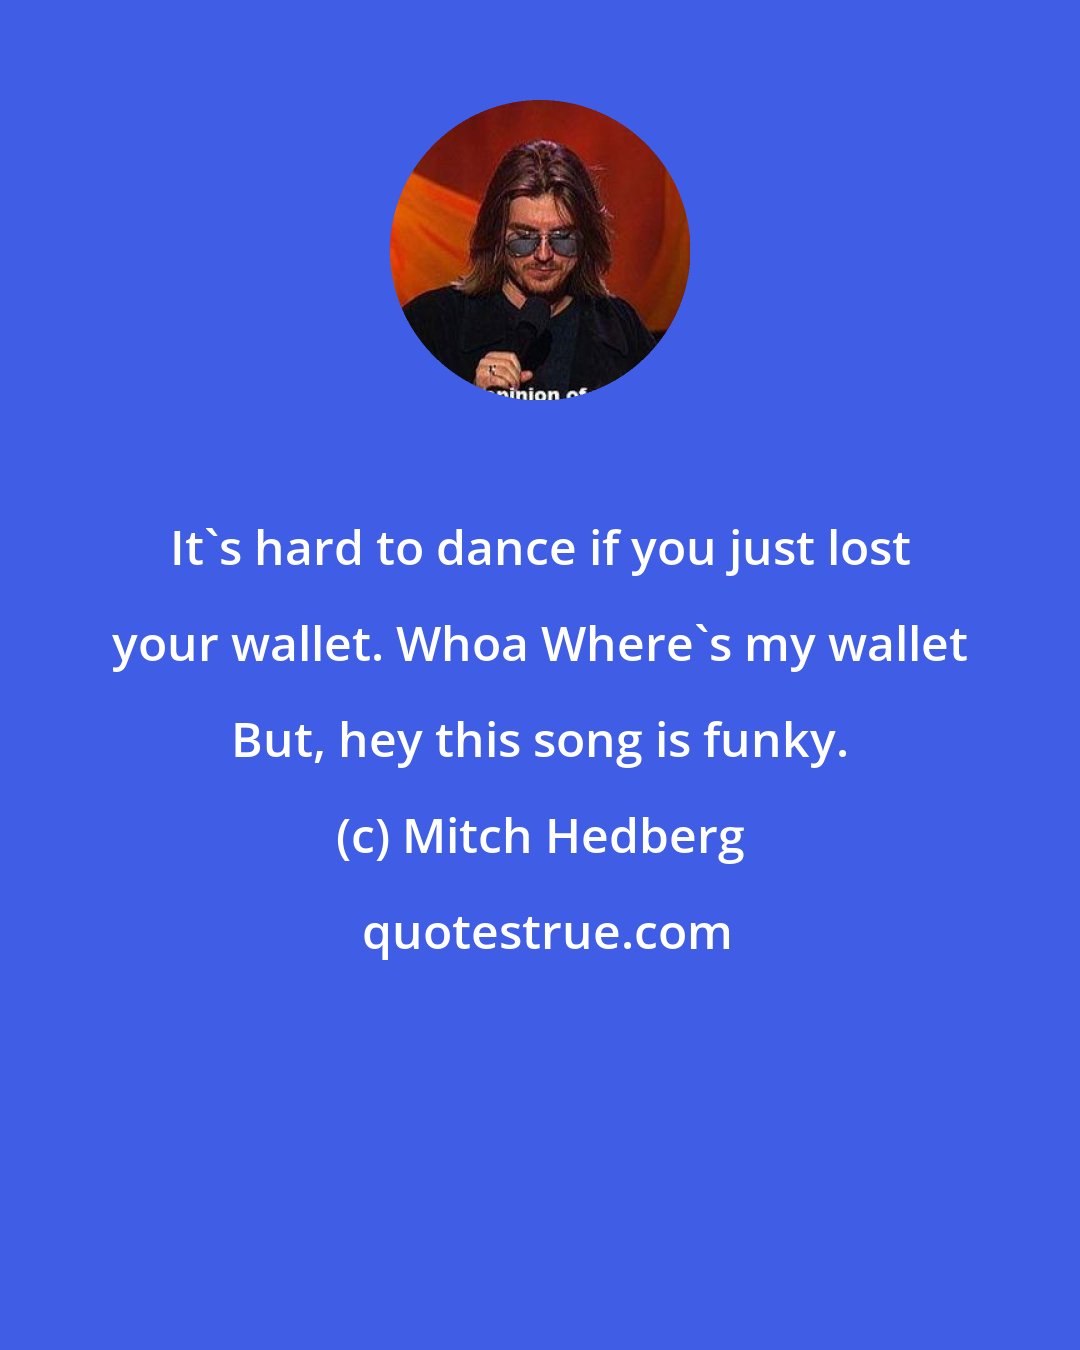 Mitch Hedberg: It's hard to dance if you just lost your wallet. Whoa Where's my wallet But, hey this song is funky.